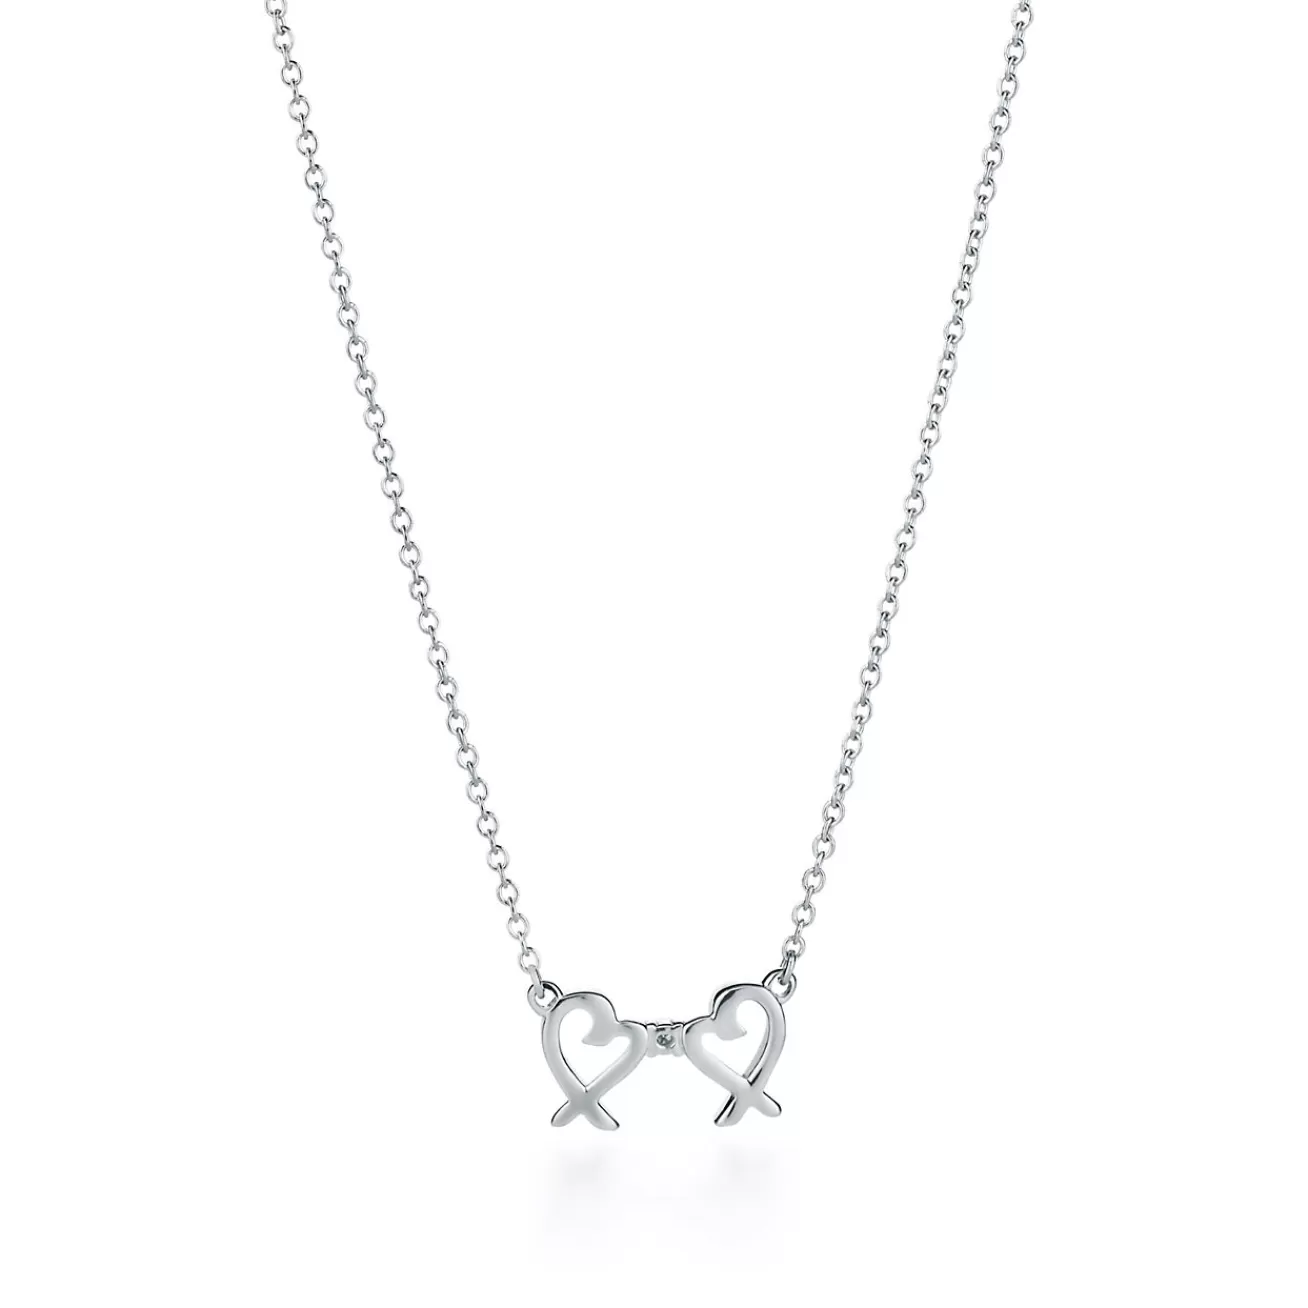 Tiffany & Co. Paloma Picasso® Double Loving Heart pendant in sterling silver with diamonds. | ^ Necklaces & Pendants | Sterling Silver Jewelry